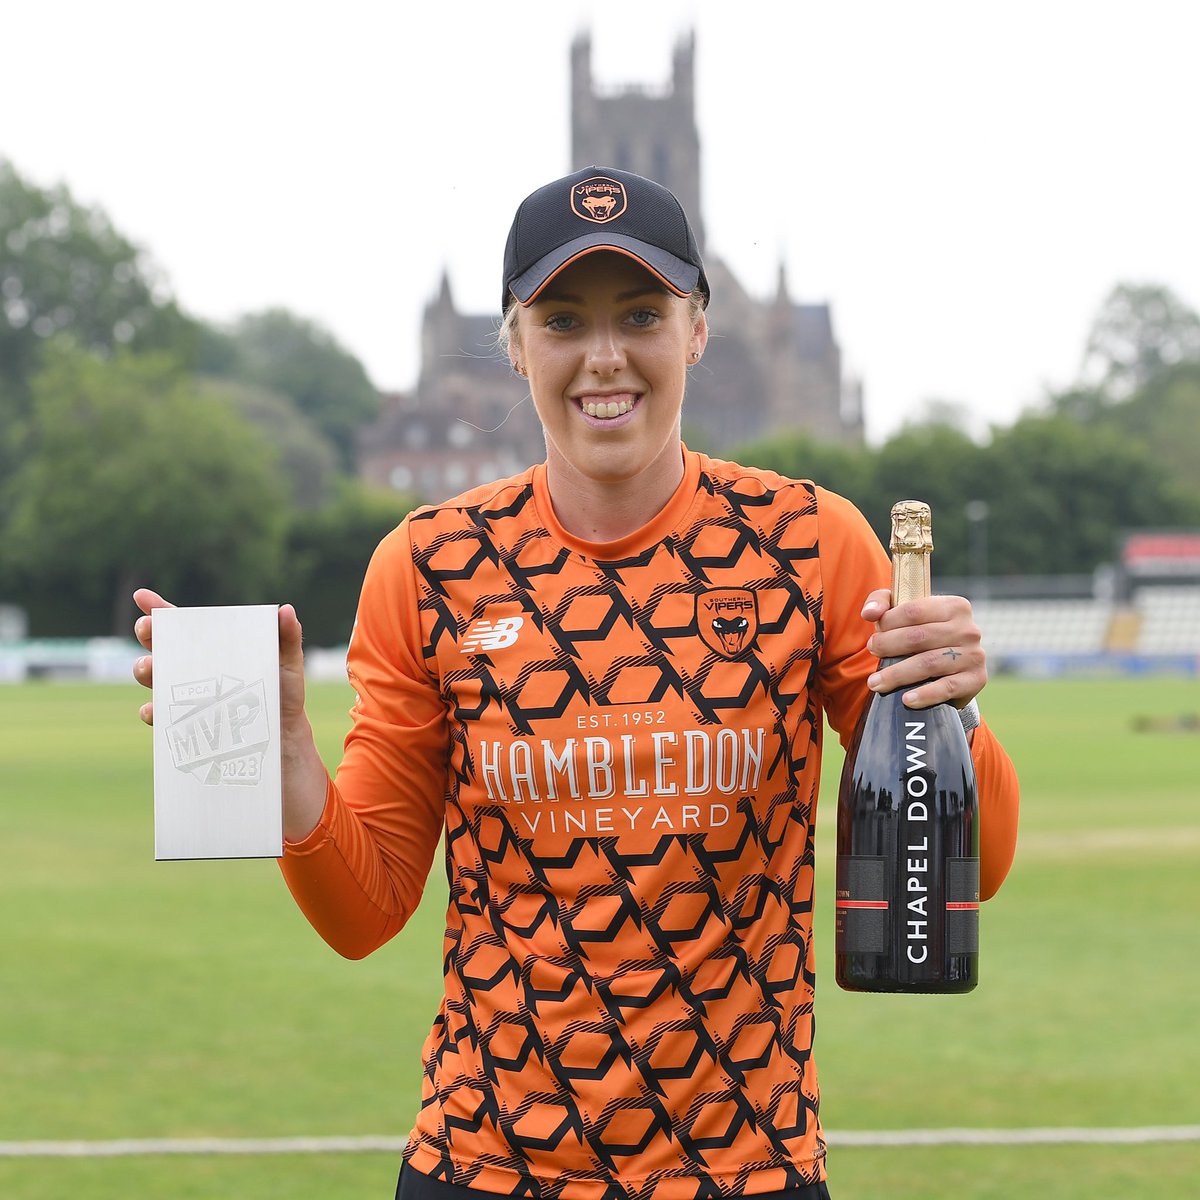 🏆 @GeorgiaAdams01 completes the set! 2️⃣0️⃣2️⃣0️⃣ #RHFT MVP 2️⃣0️⃣2️⃣2️⃣ Overall MVP 2️⃣0️⃣2️⃣3️⃣ #CECup MVP Read how she became the Charlotte Edwards Cup Player of the Year, sponsored by Vitality 👇 bit.ly/AdamsMVP